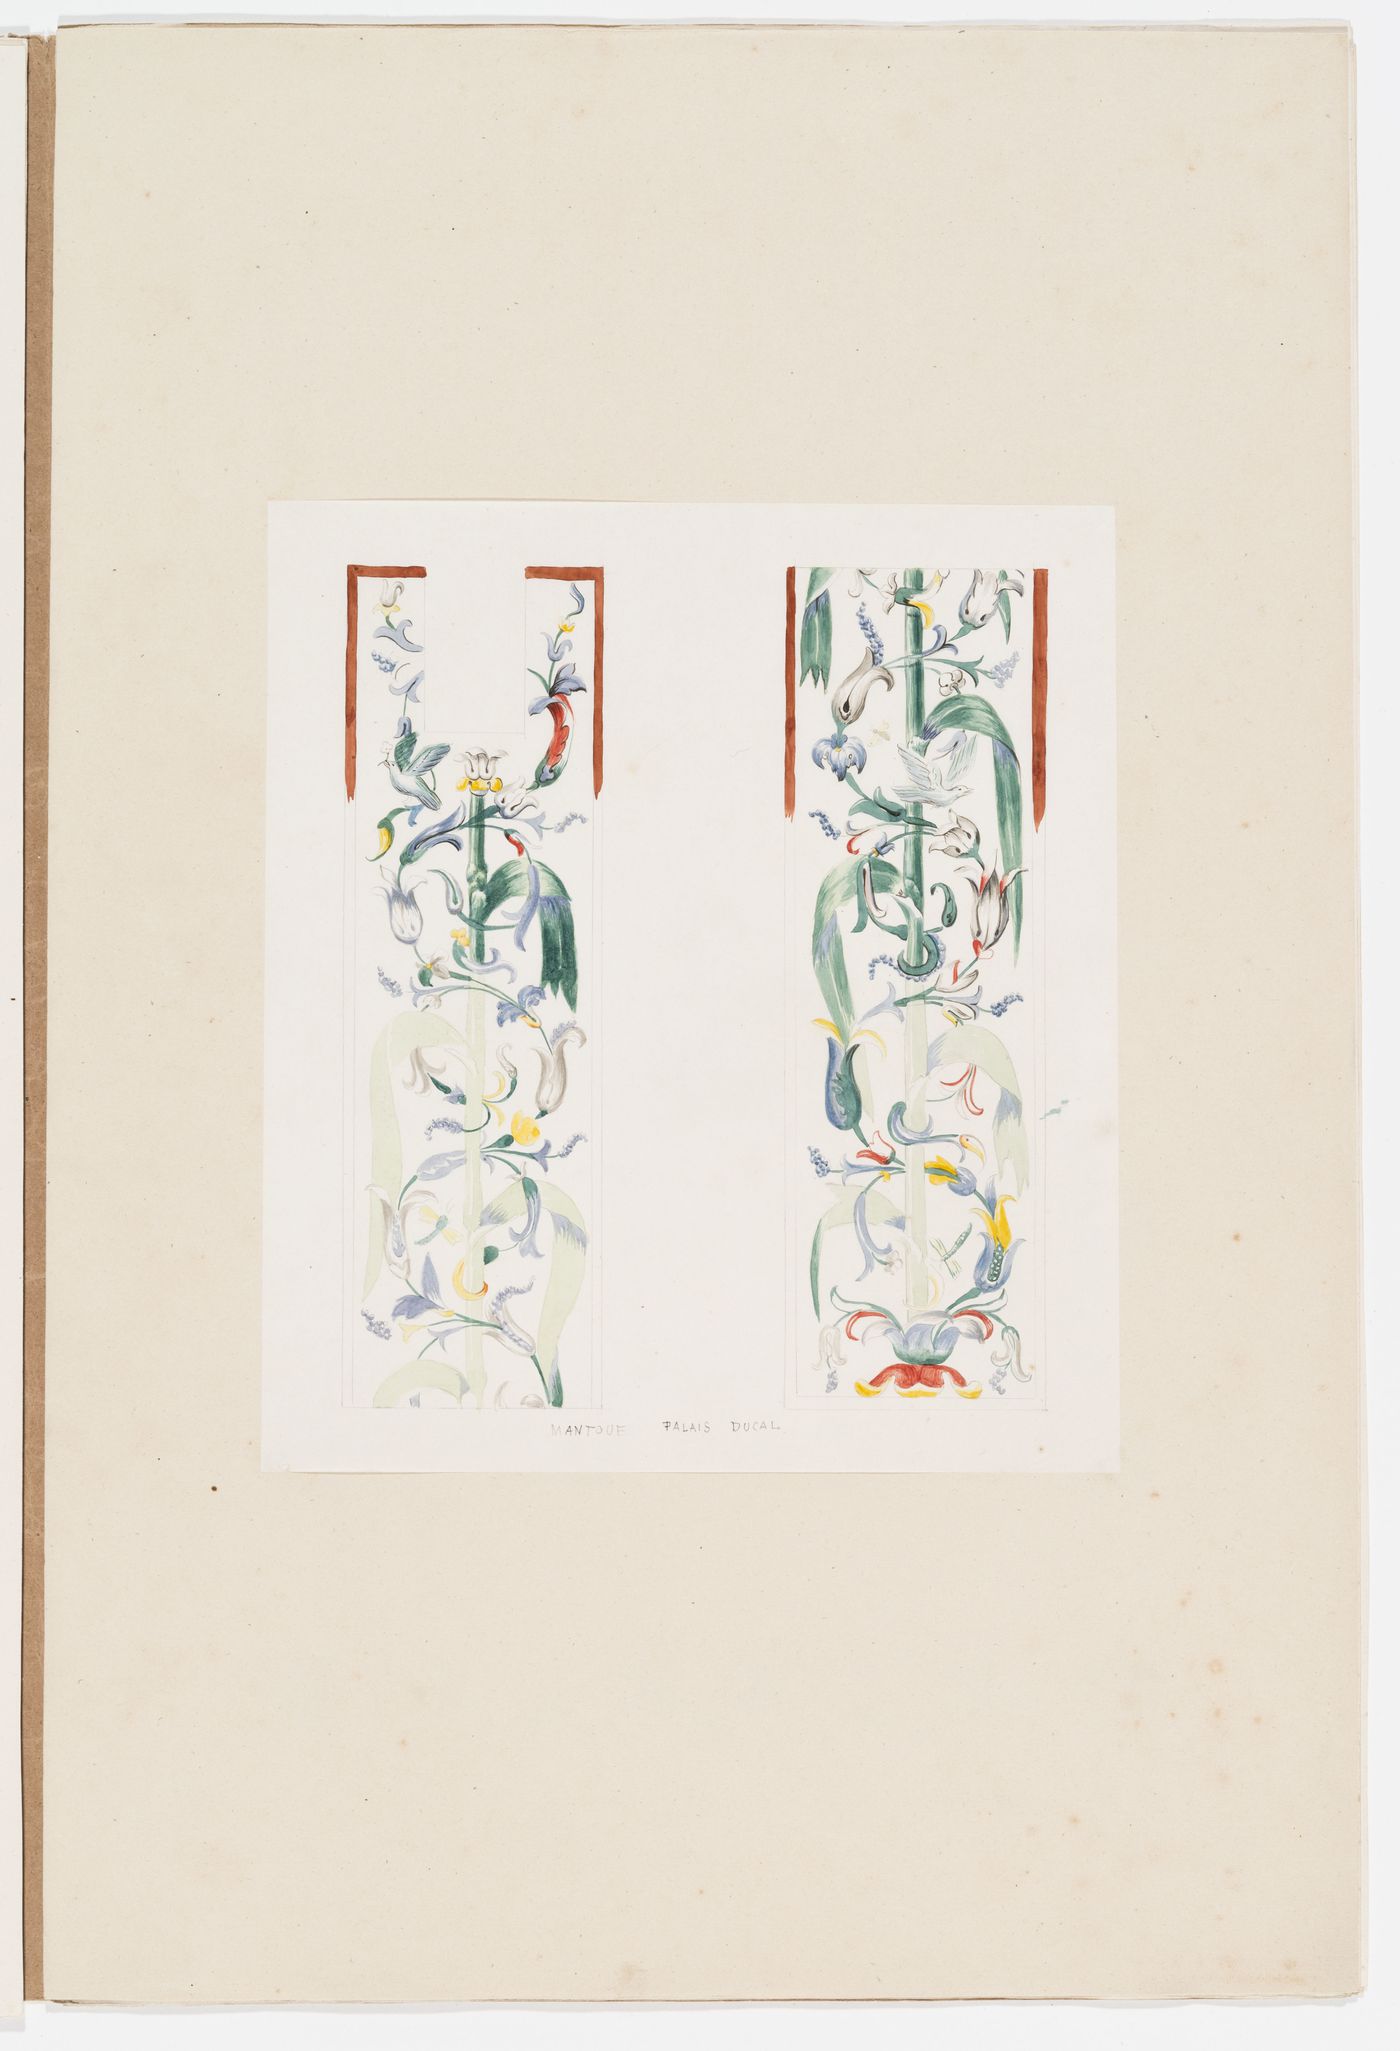 Ornament drawing of a vertical band decorated with arabesques from the Palazzo ducale, Mantua